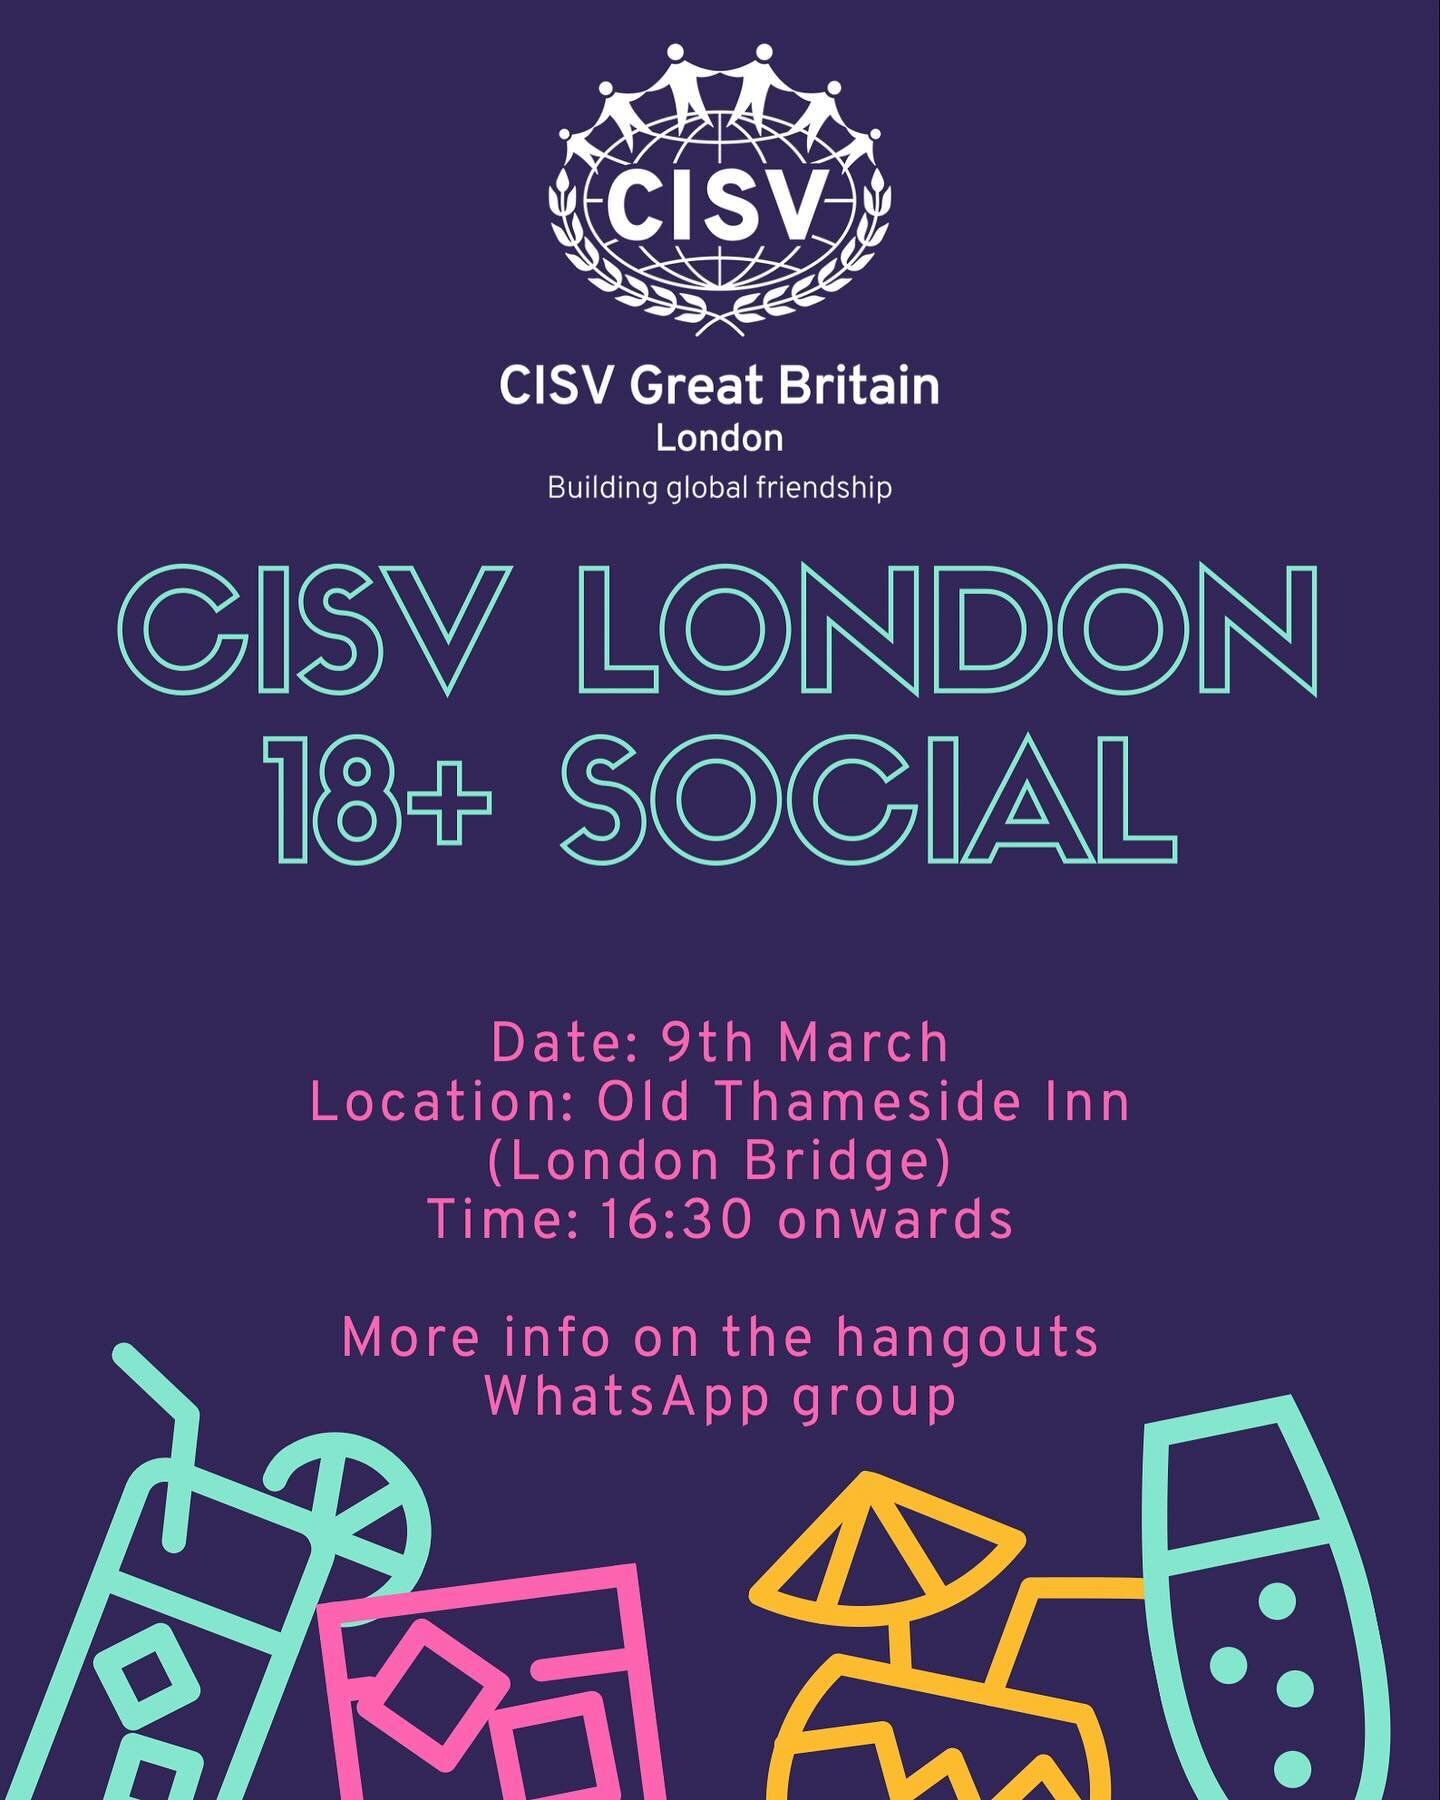 Calling out to anyone in London at the moment! 🇬🇧 🇬🇧 

CISV London have a hangouts social this weekend!

9th March 16:30 onwards 
At the Old Thameside Inn near London Bridge

Everyone is welcome, those new and old to CISV London.

DM us to join t